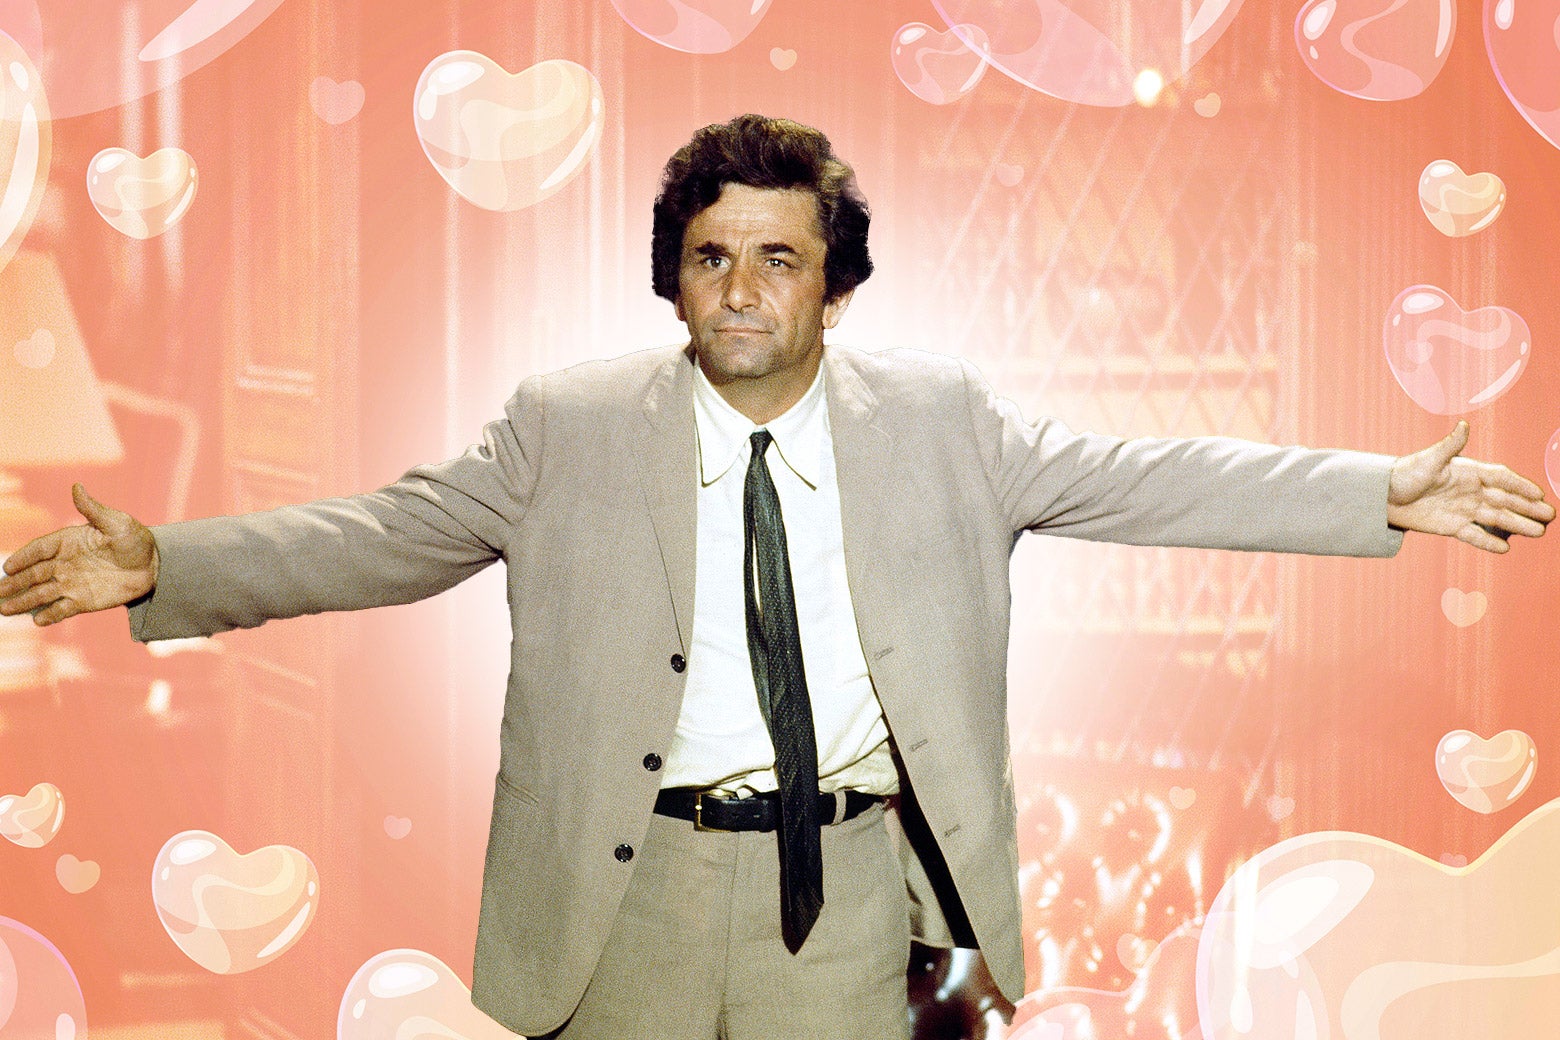 Peter Falk as Columbo in a trench coat with his arms open amongst hearts.